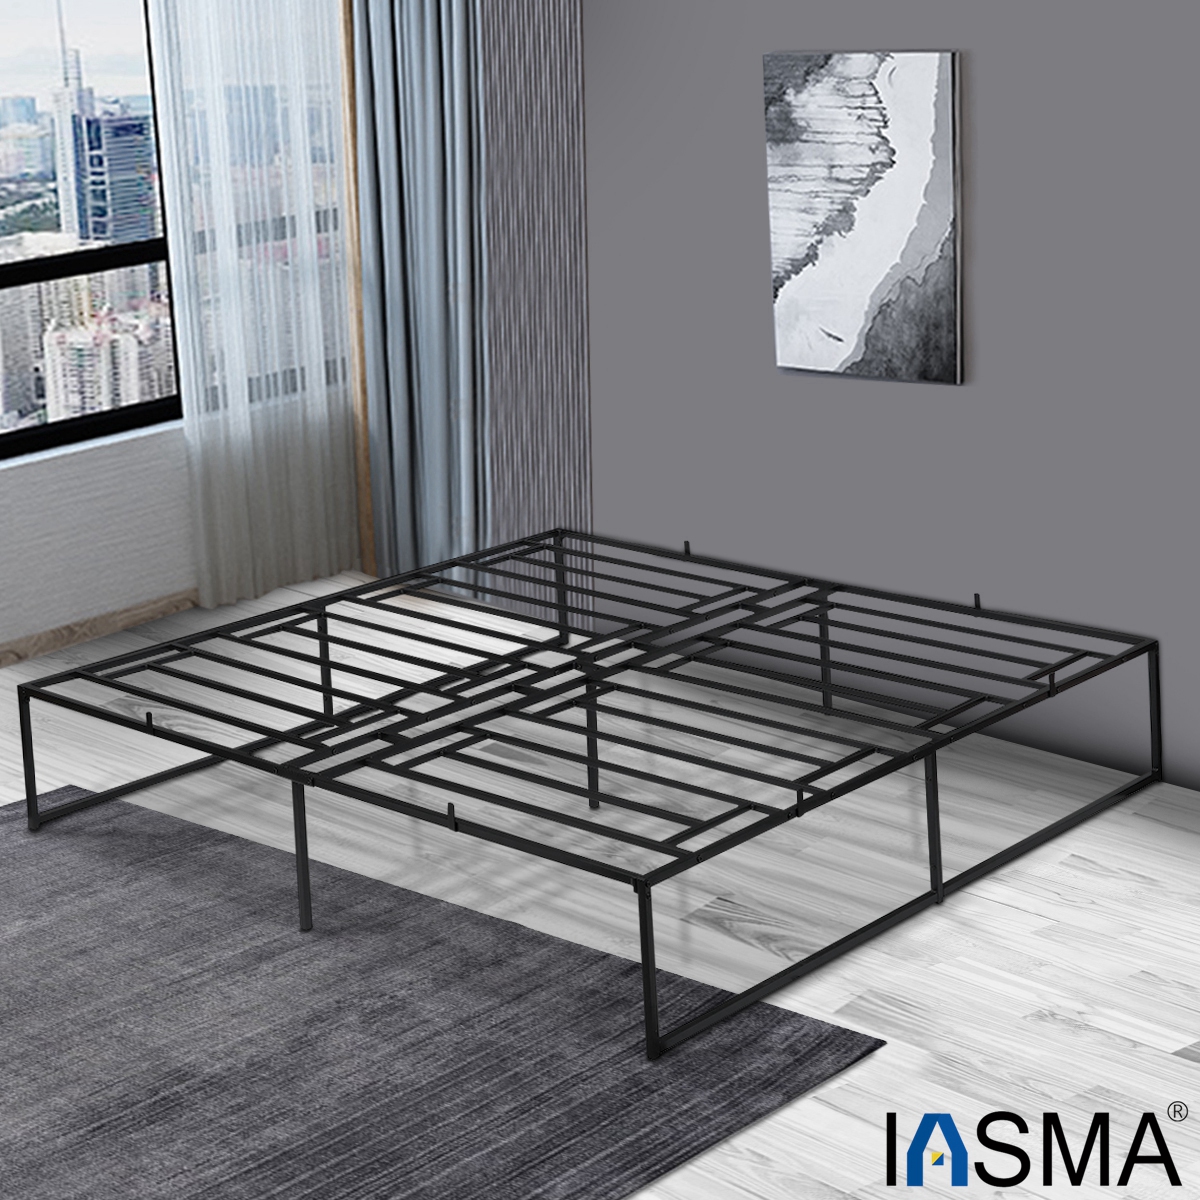 Details about   INSMA Full Size Heavy Duty Metal Bed Frame Platform Mattress Foundation 1102lbs 